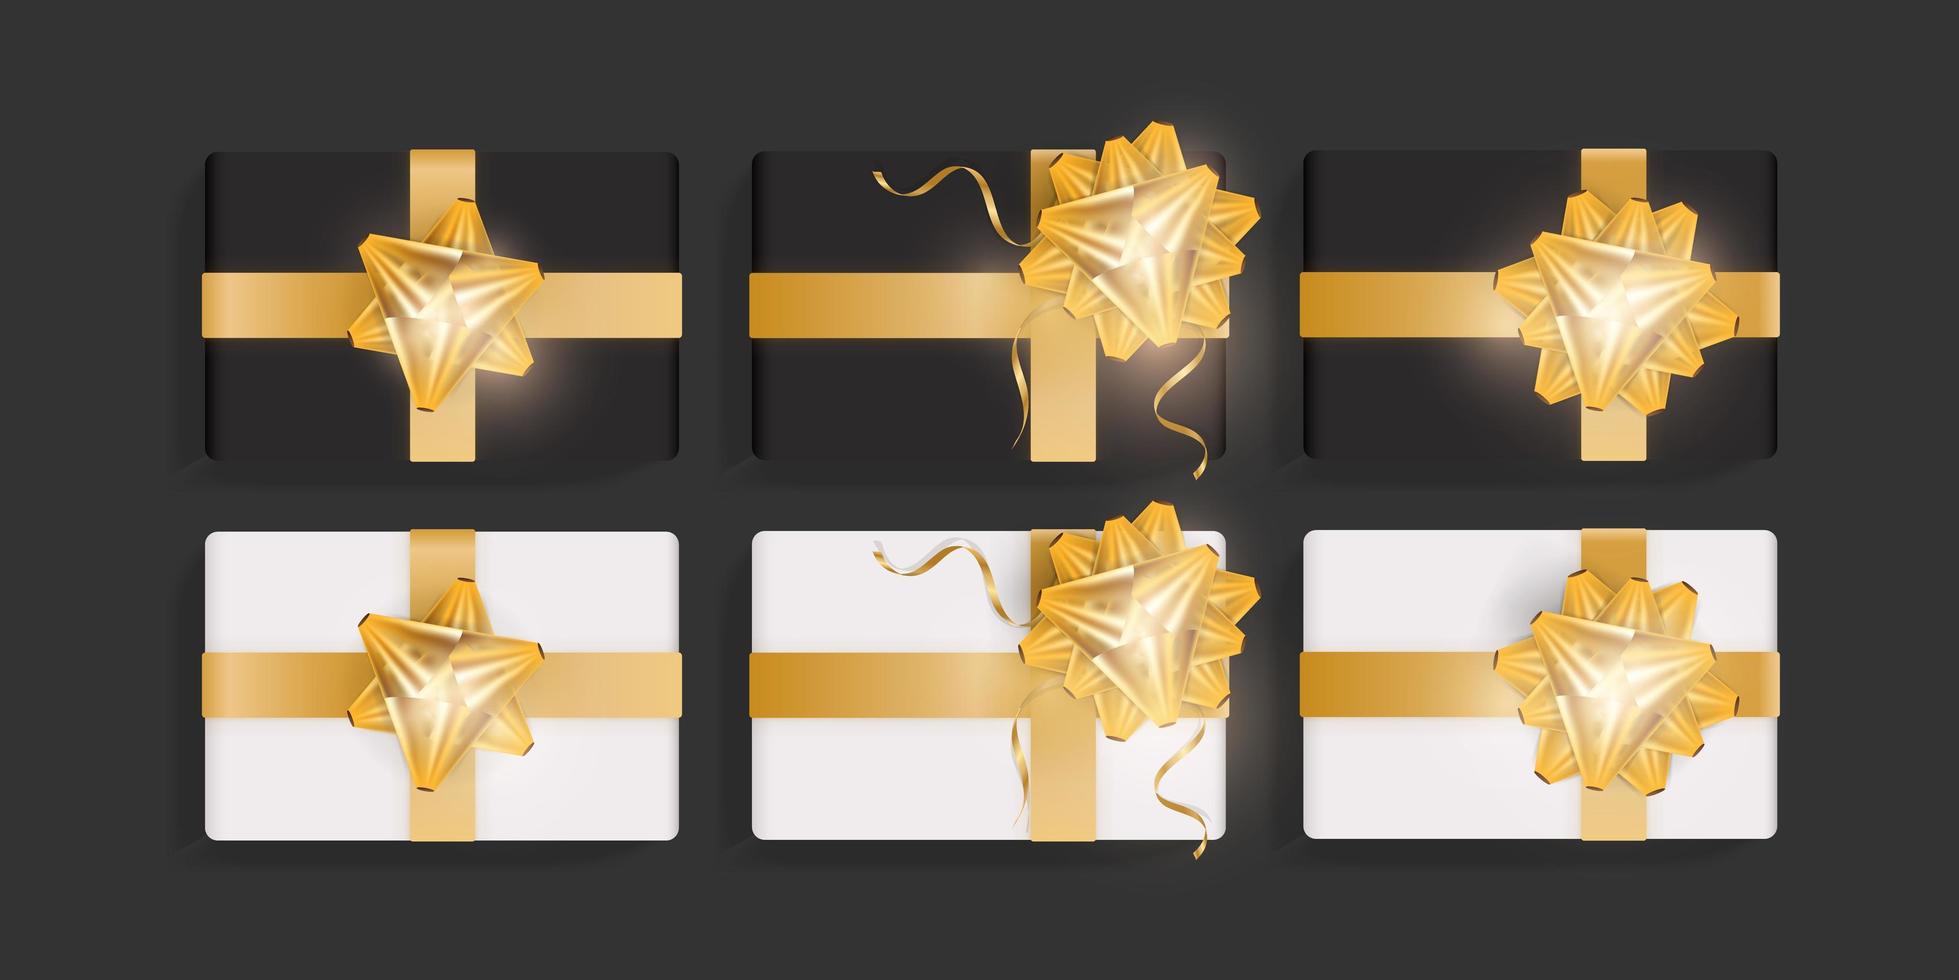 Set of white and black gift boxes with gold ribbon bows. Beautiful realistic gift box template for birthday, christmas, new year design. Top view vector illustration